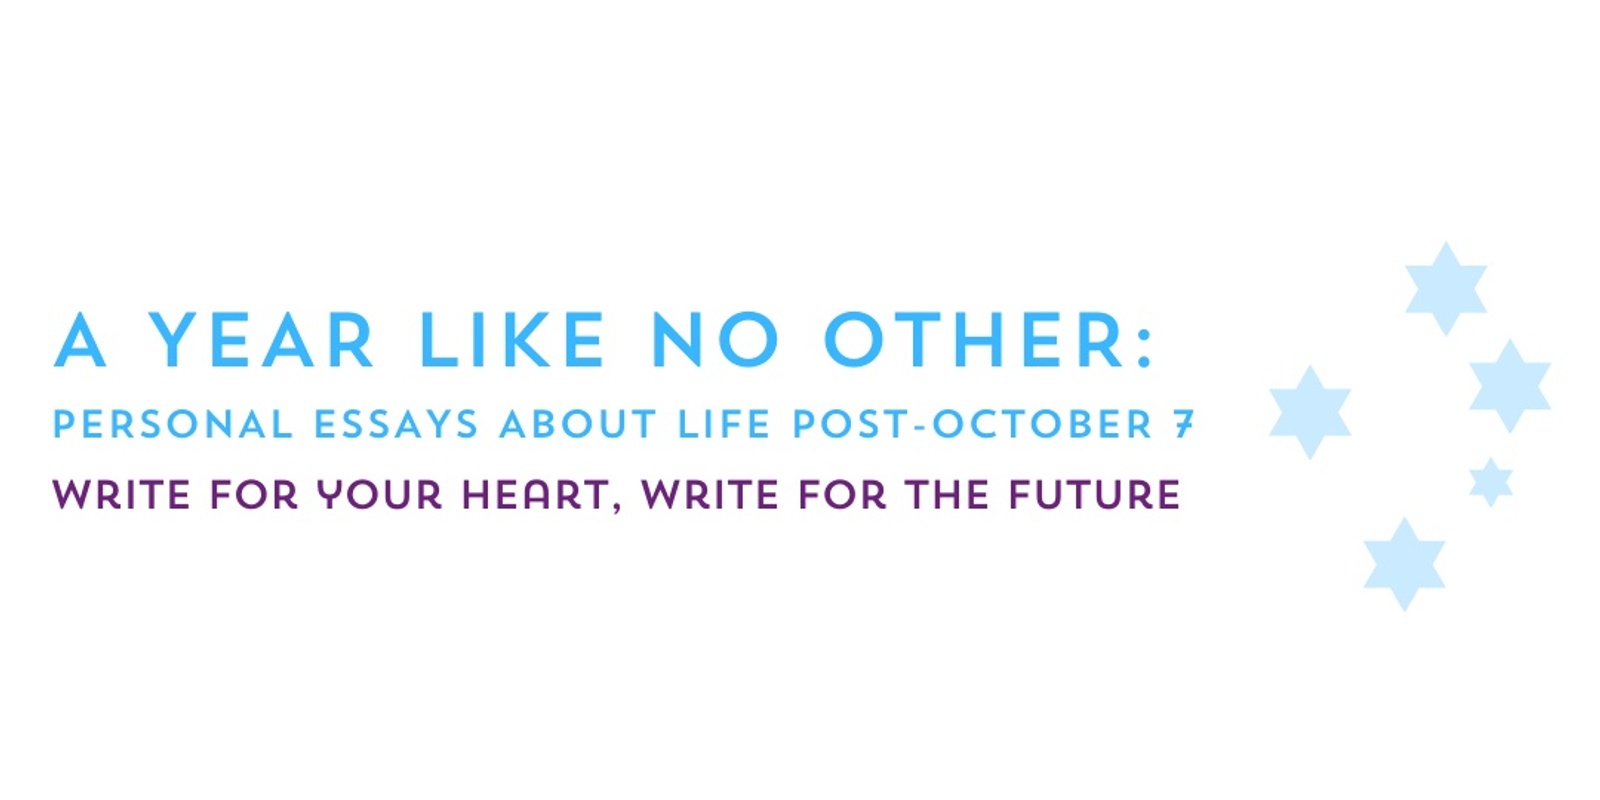 Banner image for ANTHOLOGY PROJECT: A YEAR LIKE NO OTHER